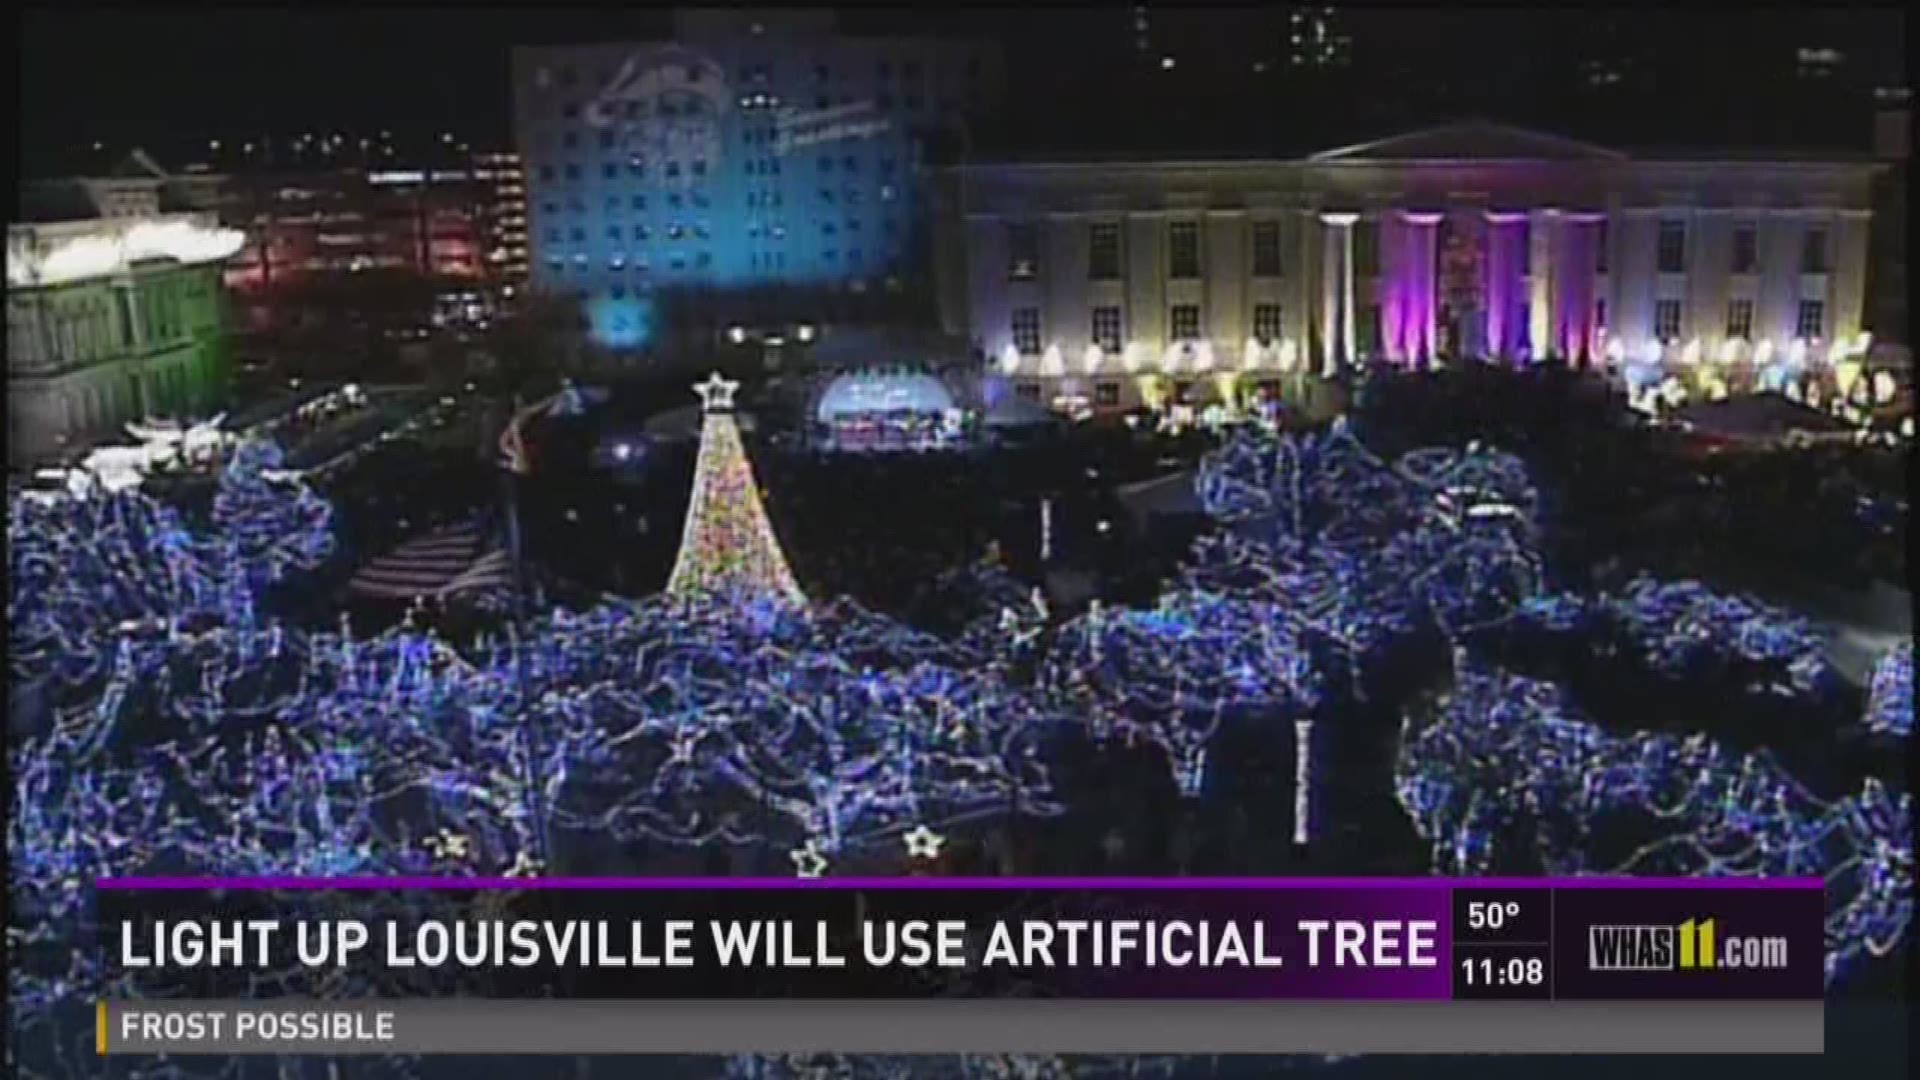 Light Up Louisville will use artificial tree